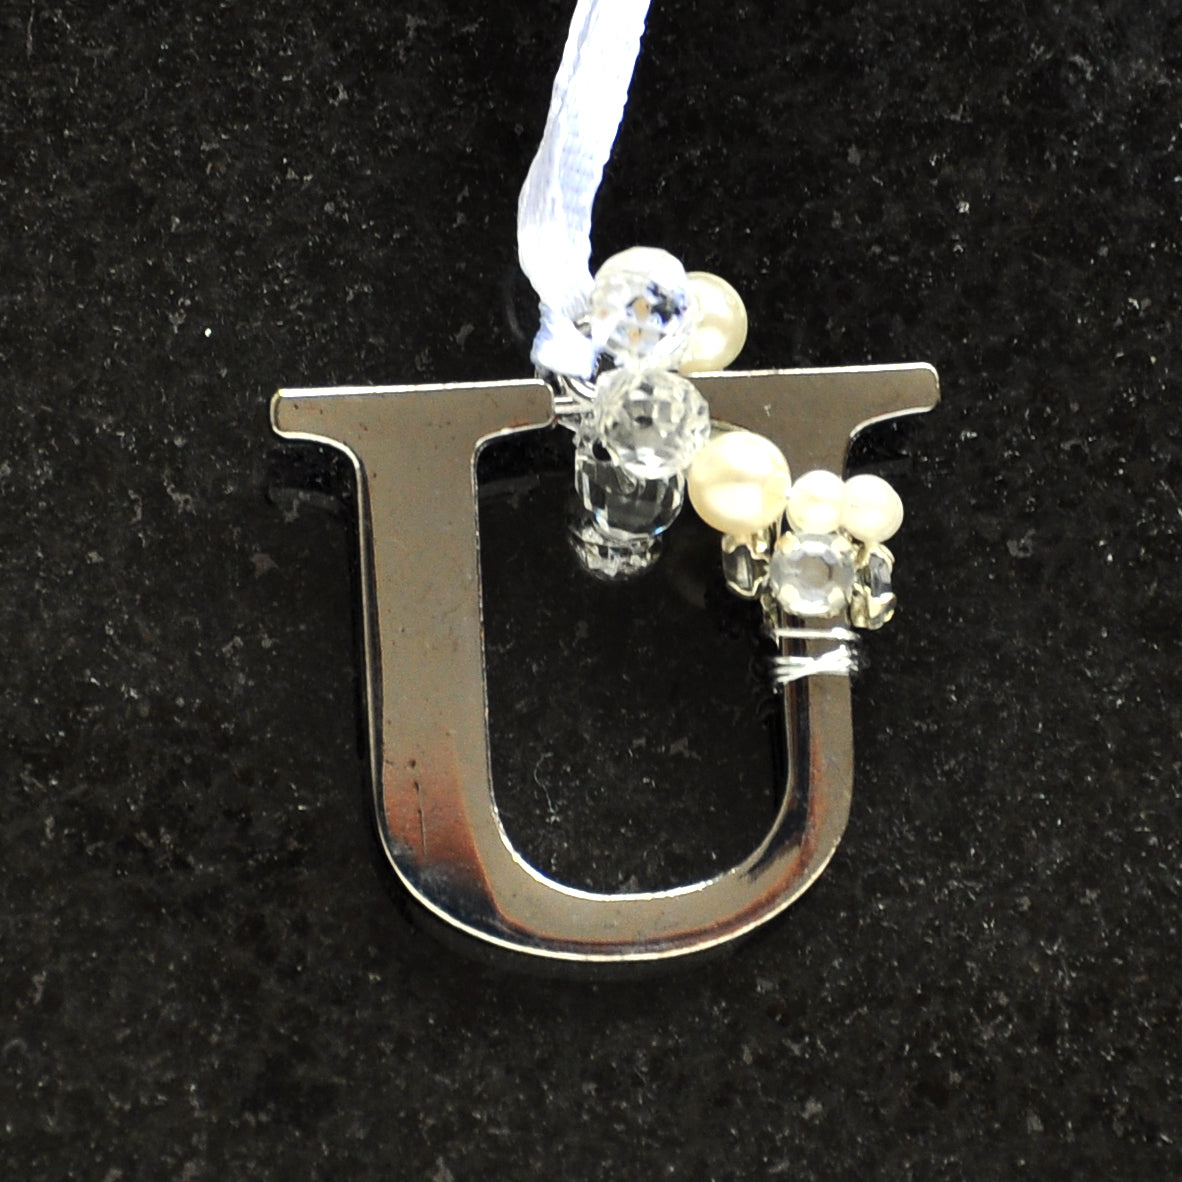 Alphabet Letter Silver Jewelled Tree Decorations